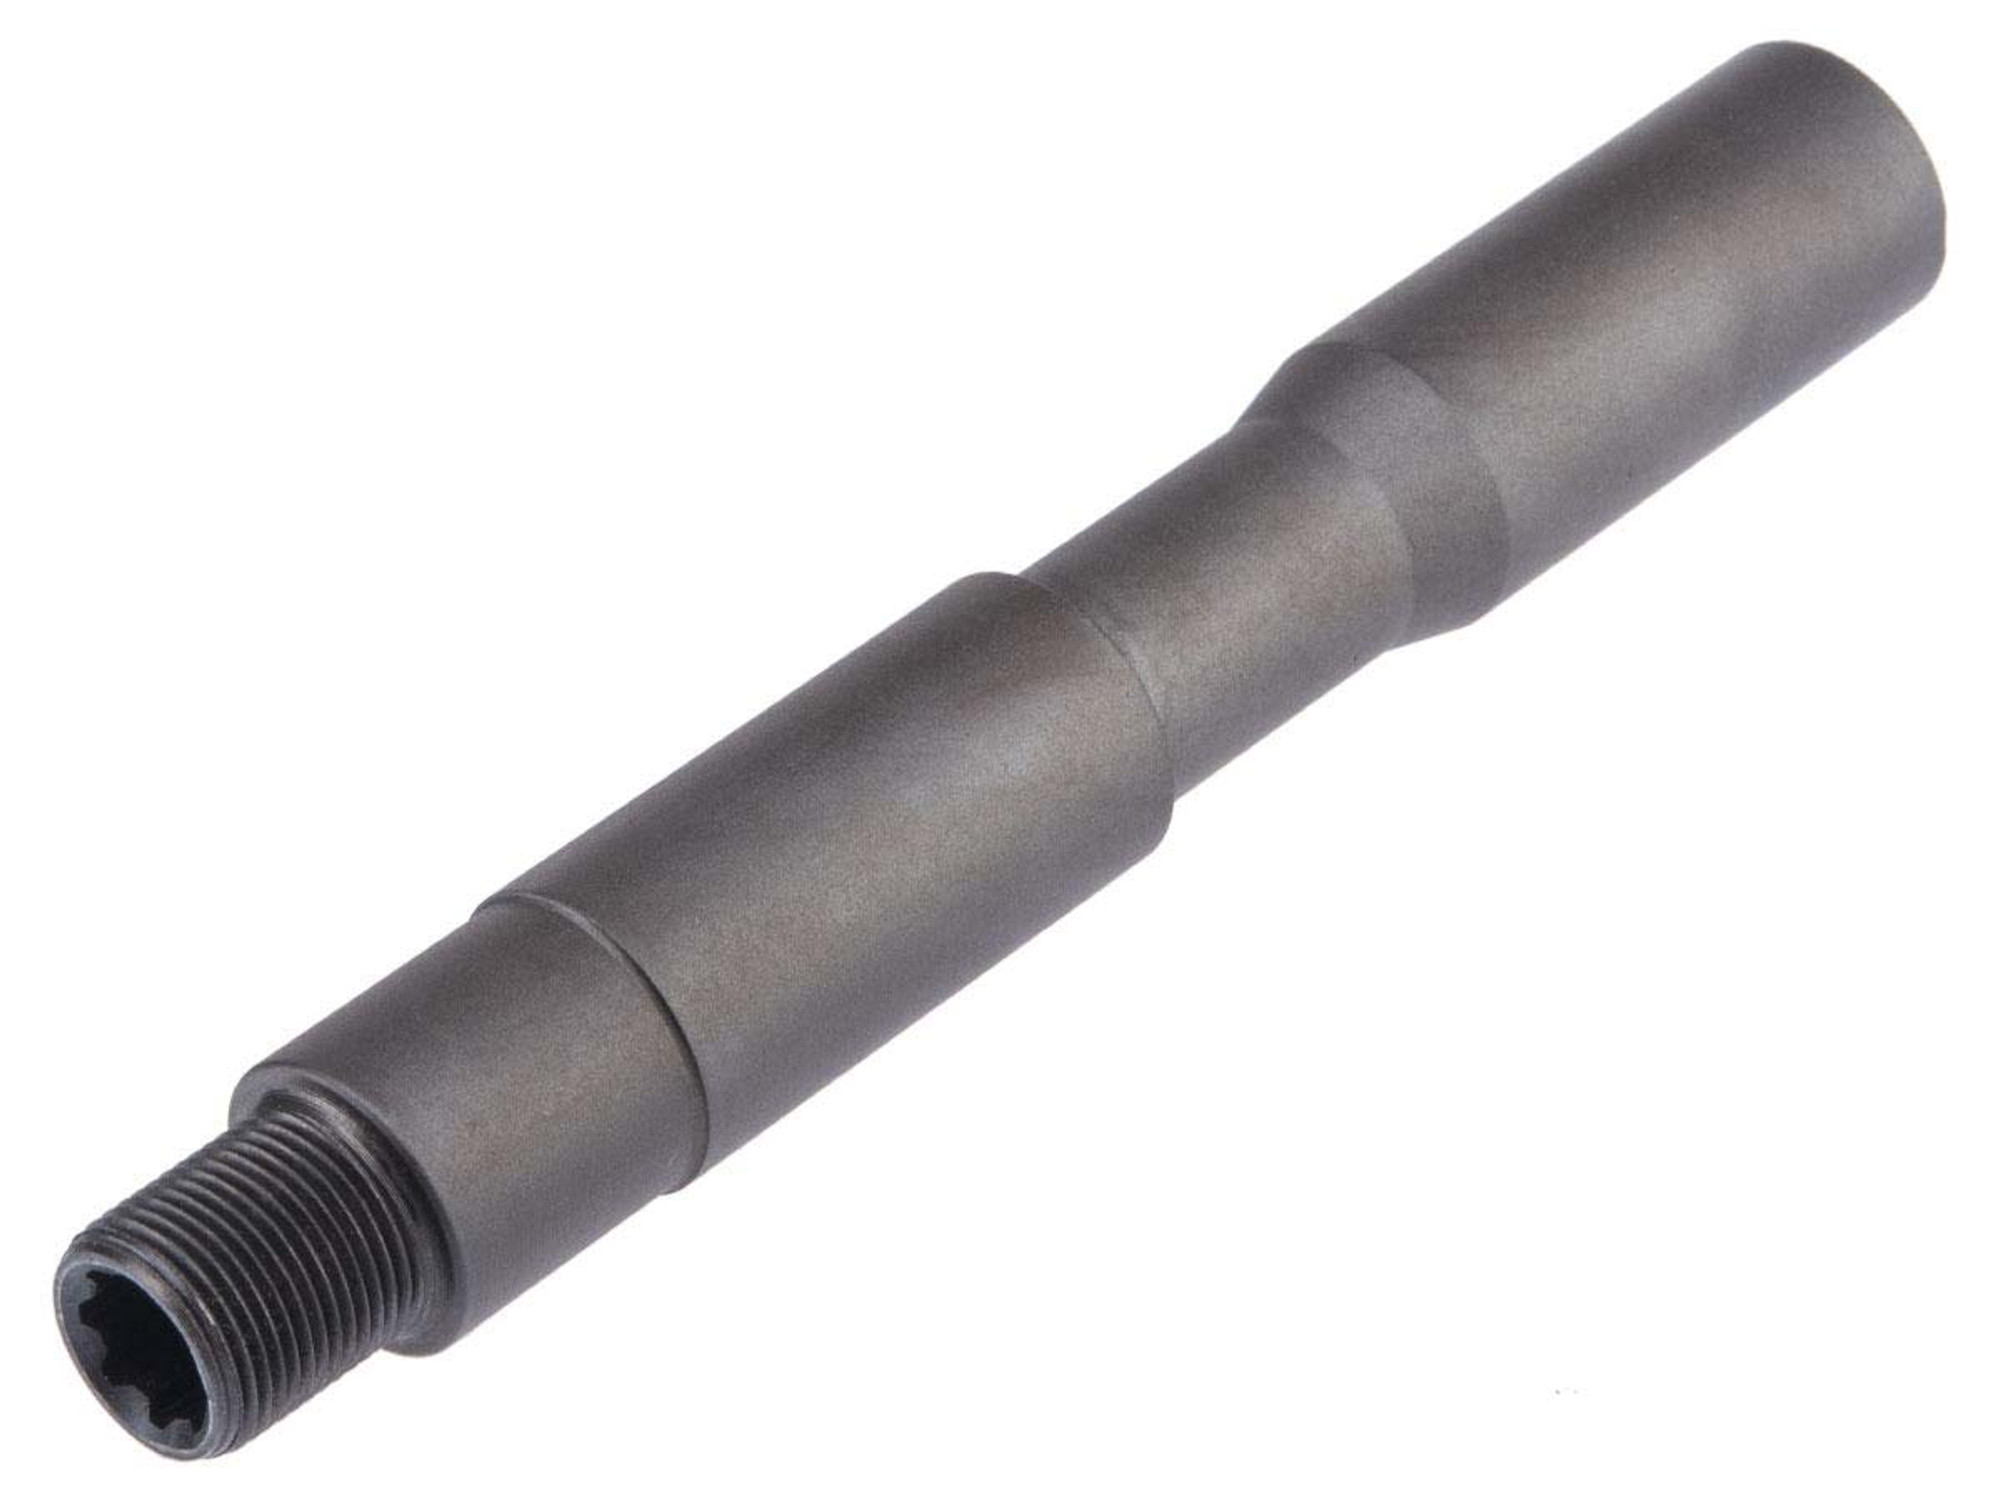 KWA LM4 PTR Series 14mm CCW Threaded Outer Barrel (Model: 5.5" Extension)